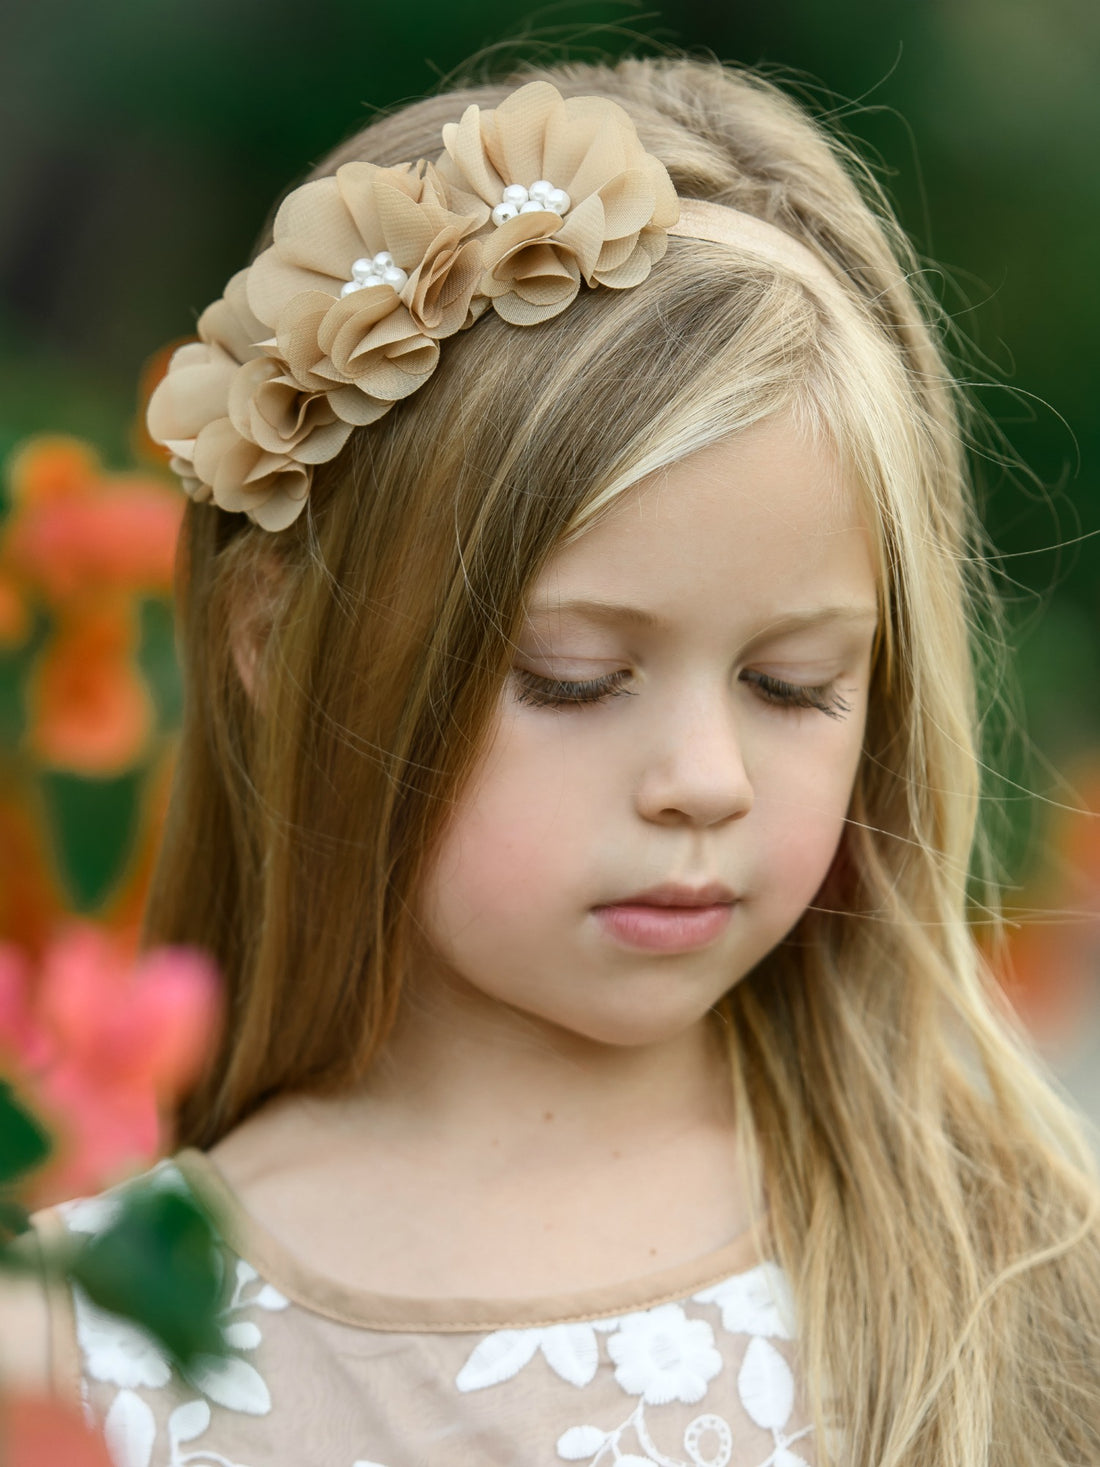 Vintage Blooms Trio Headband Toffee - 11 Colors Available